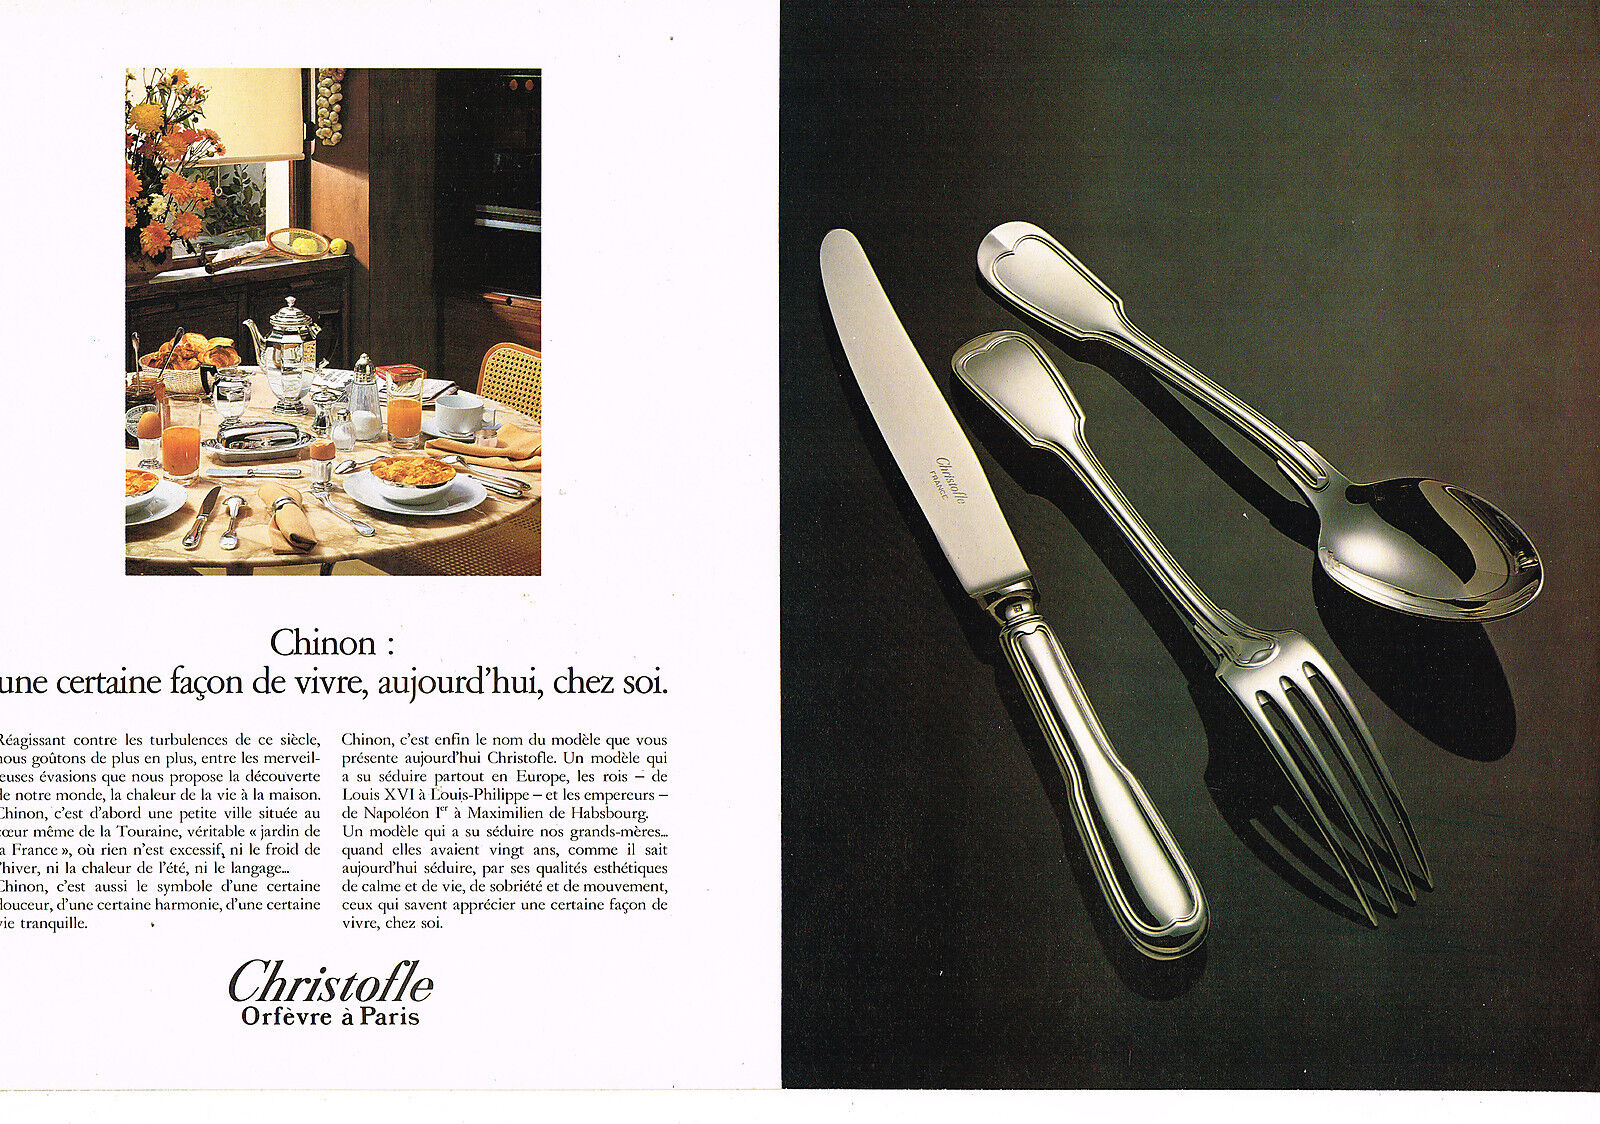 1981 CHRISTOFLE ADVERTISING ADVERTISEMENT table art (2 pages) CHINON